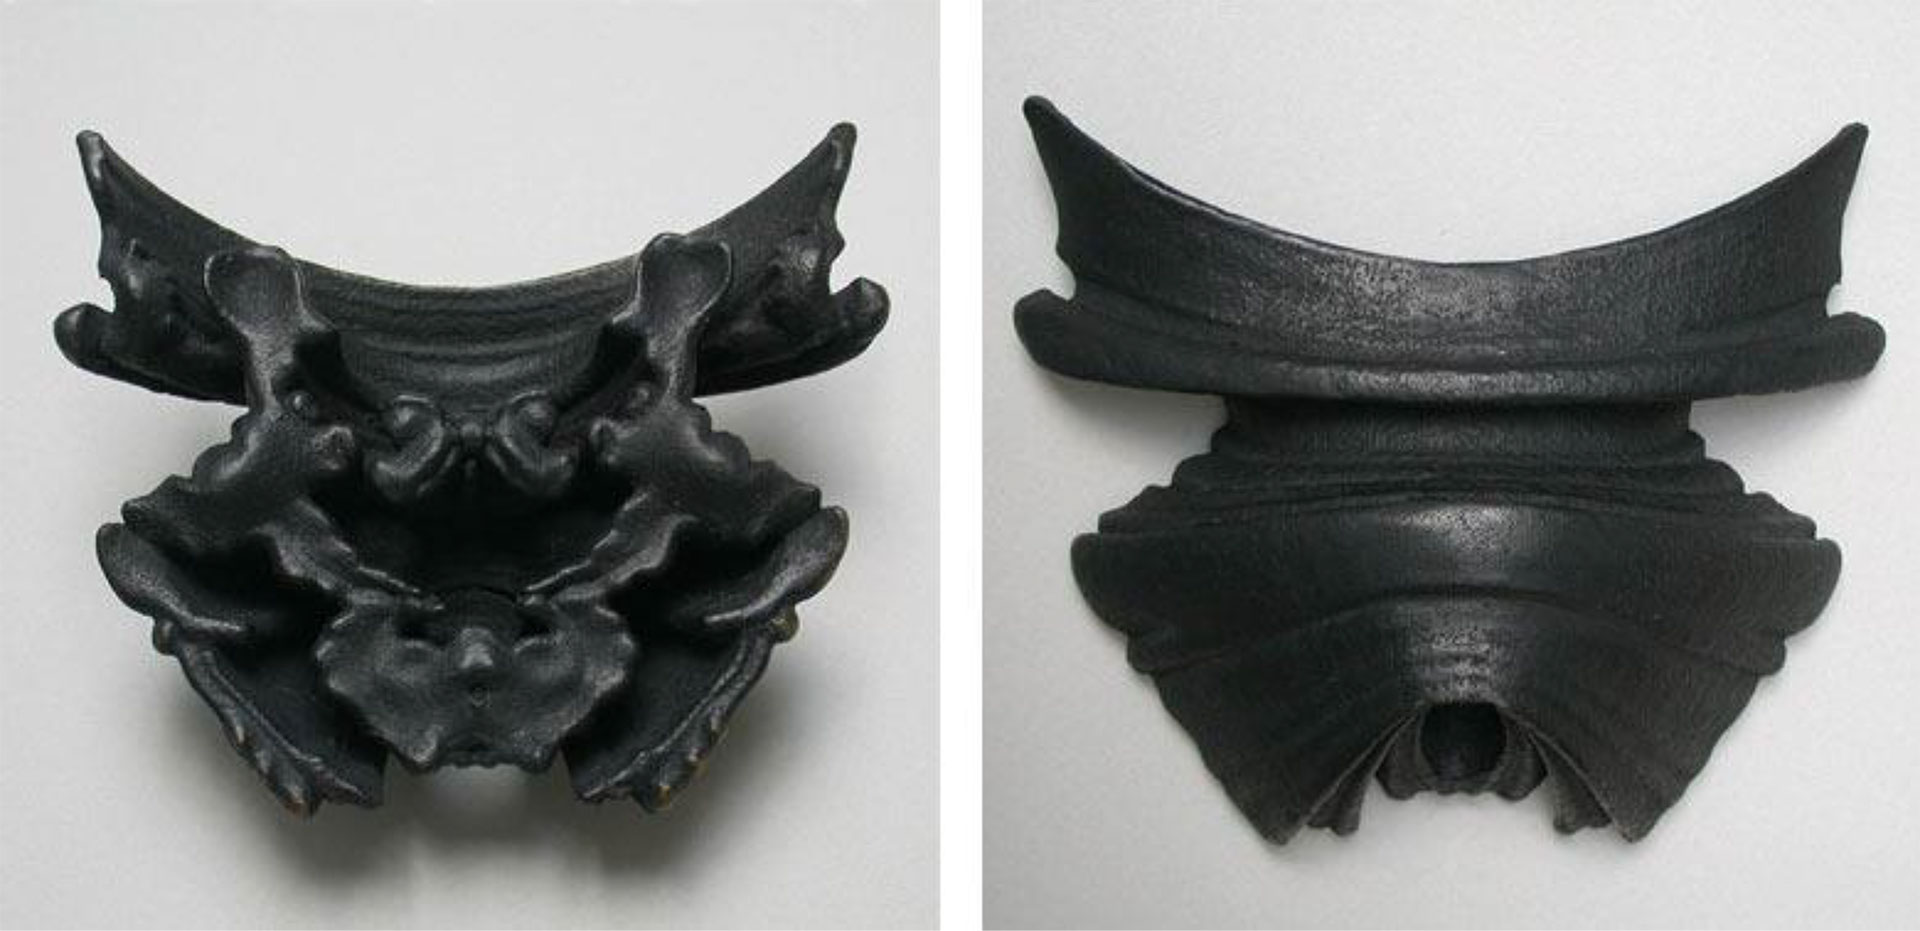 Suzanne Anker, Rorschach series (Gossipers), 2004-05. Bronze, Edition of 3. 4.5” x 4” x 1”. $4,000. Also available in 4.5” x 5” x 1”. Plaster and resin; ivory white or painted black, Edition of 6. $500.